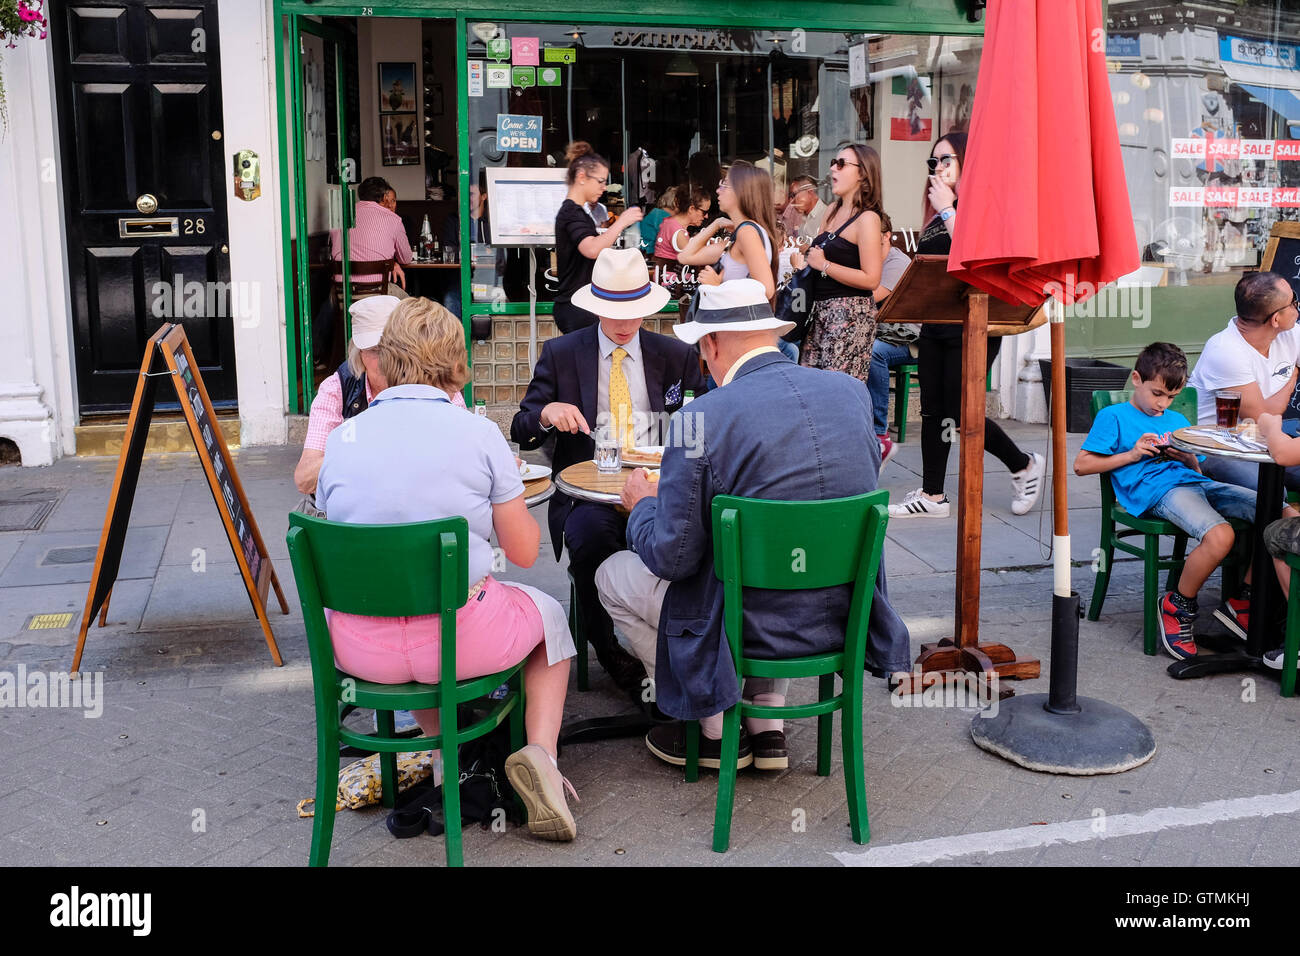 Diners outside cafe, Museum street, Bloomsbury, London, UK Stock Photo